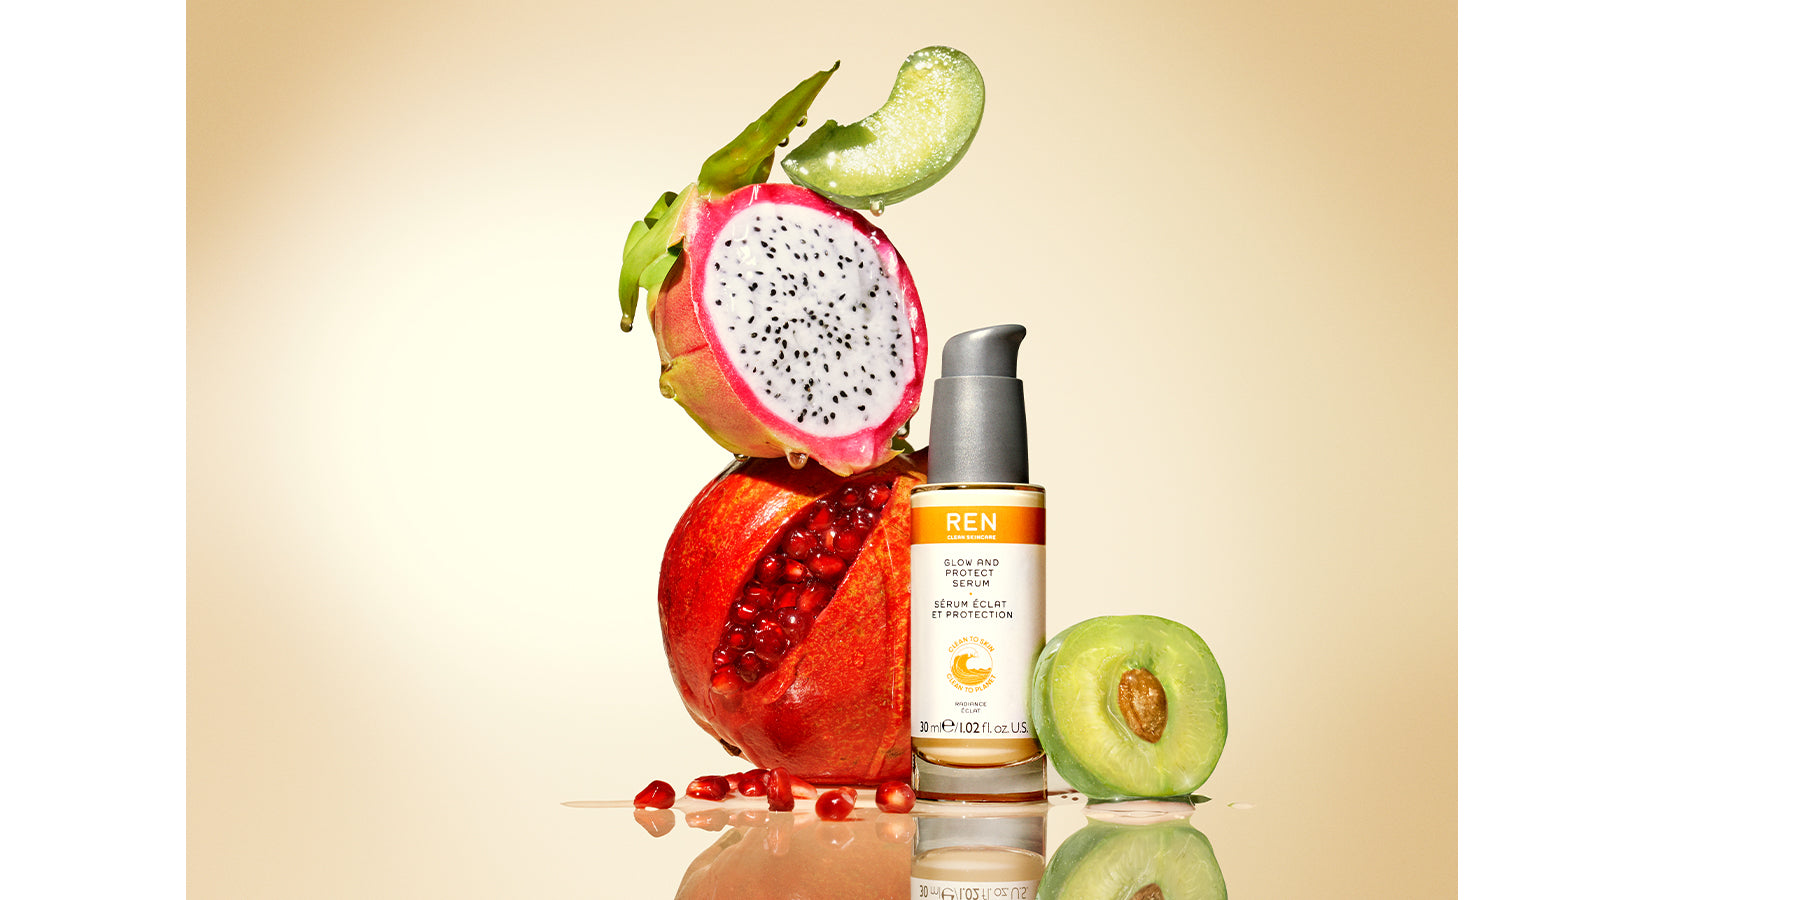 Our Glow And Protect Serum Has 3 Types of Vitamin C - Here's What They Do